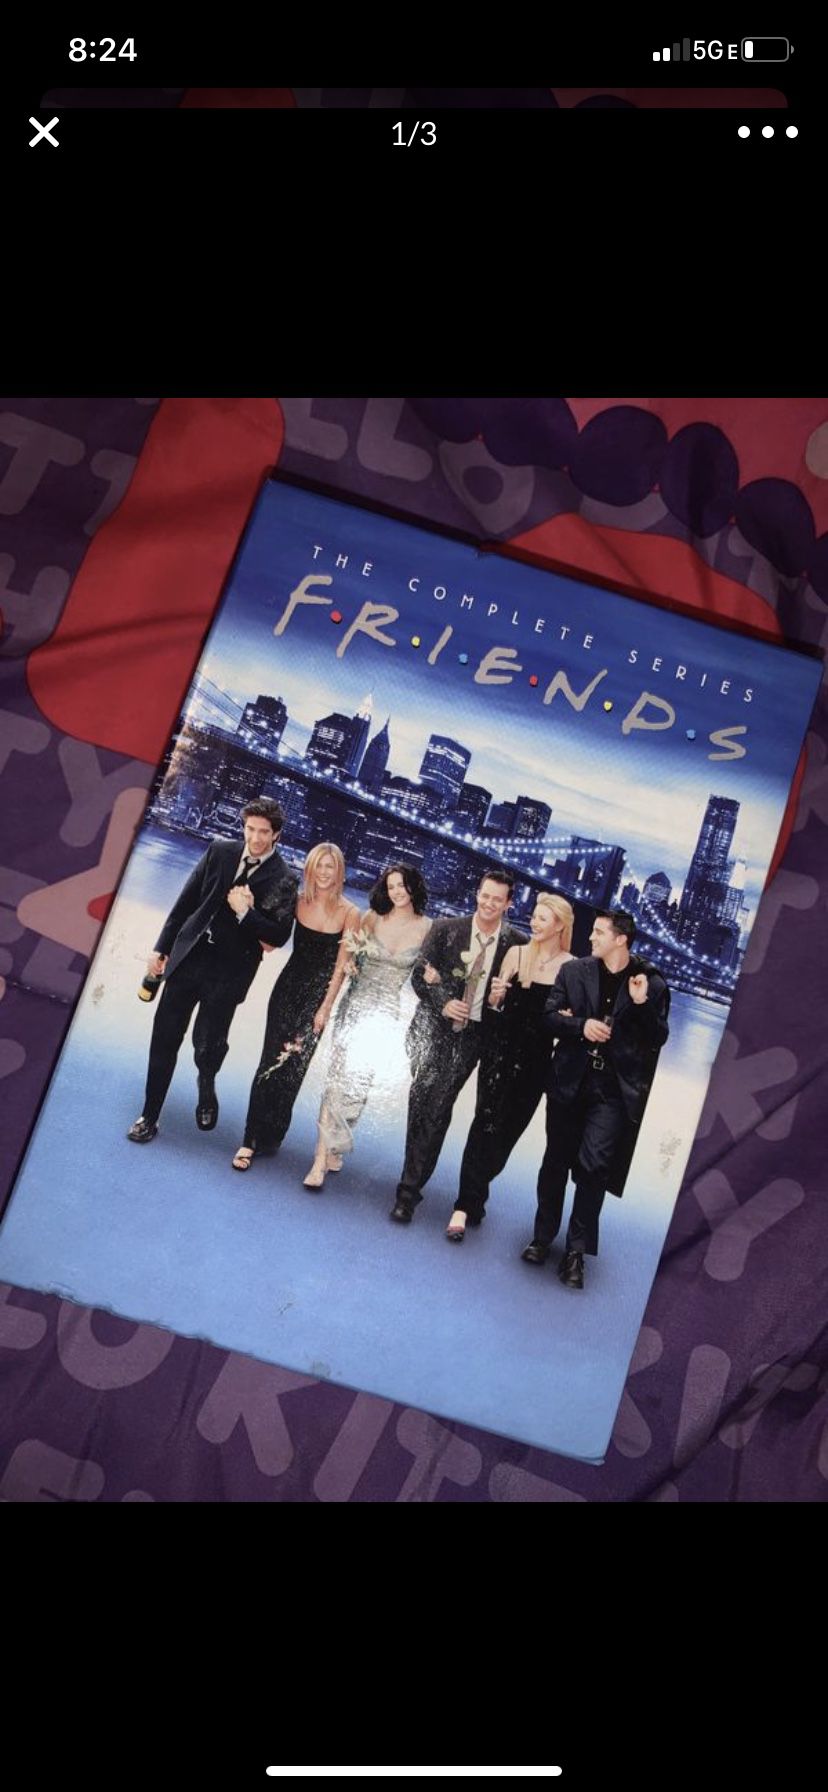 F.R.I.E.ND.S friends the complete series collection